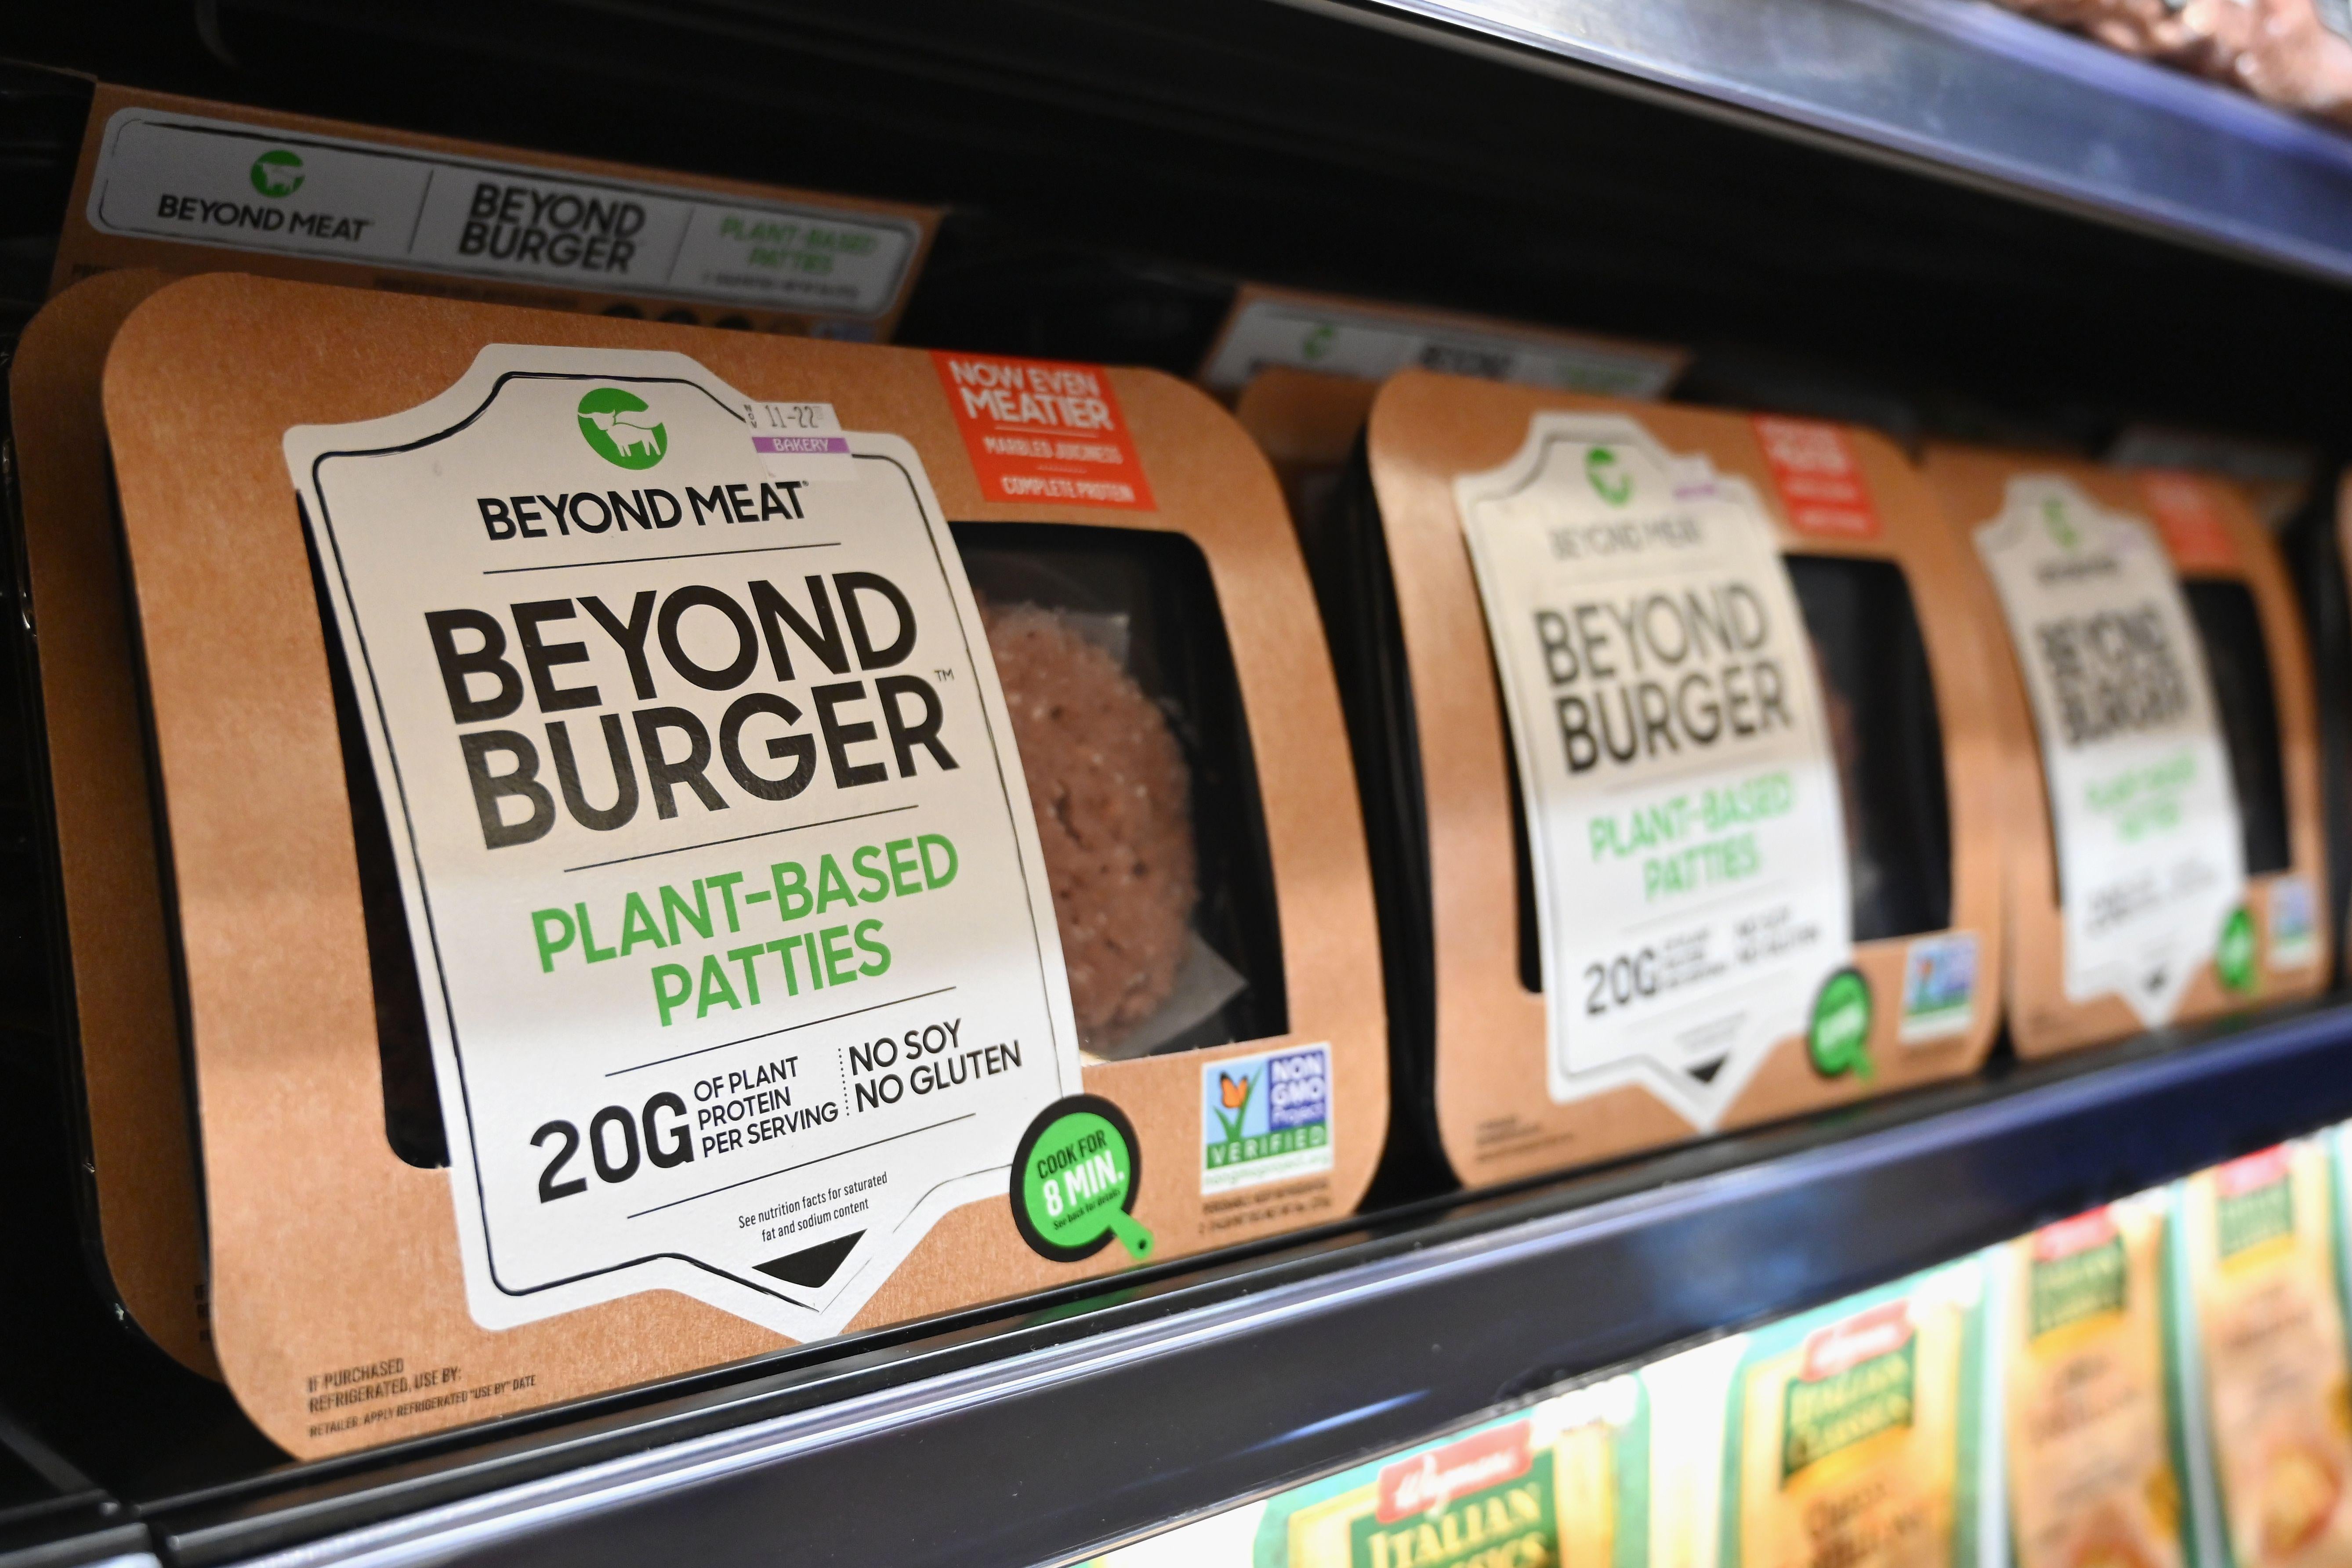 Beyond Burger packs are seen on a grocery store shelf.